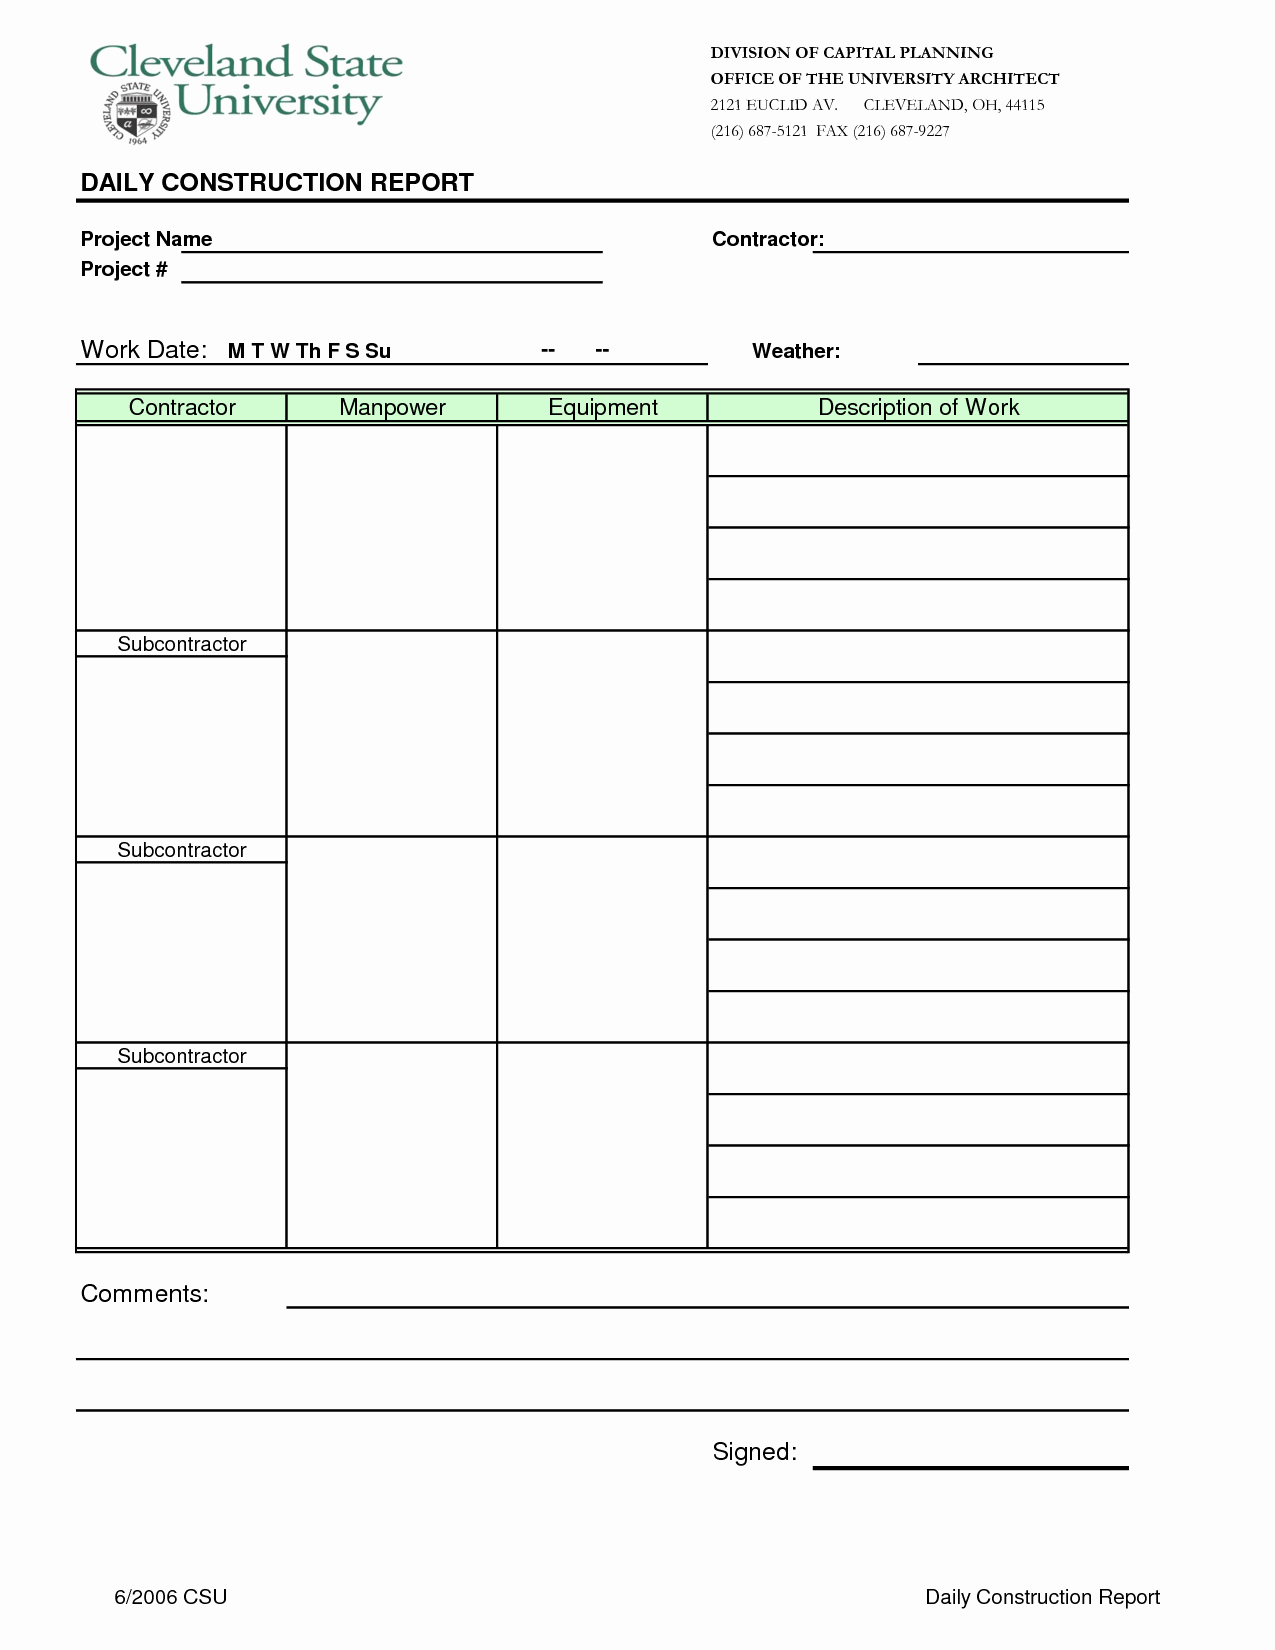 Daily Work Report Template Luxury Best S Of Daily Work Progress Report Template Daily